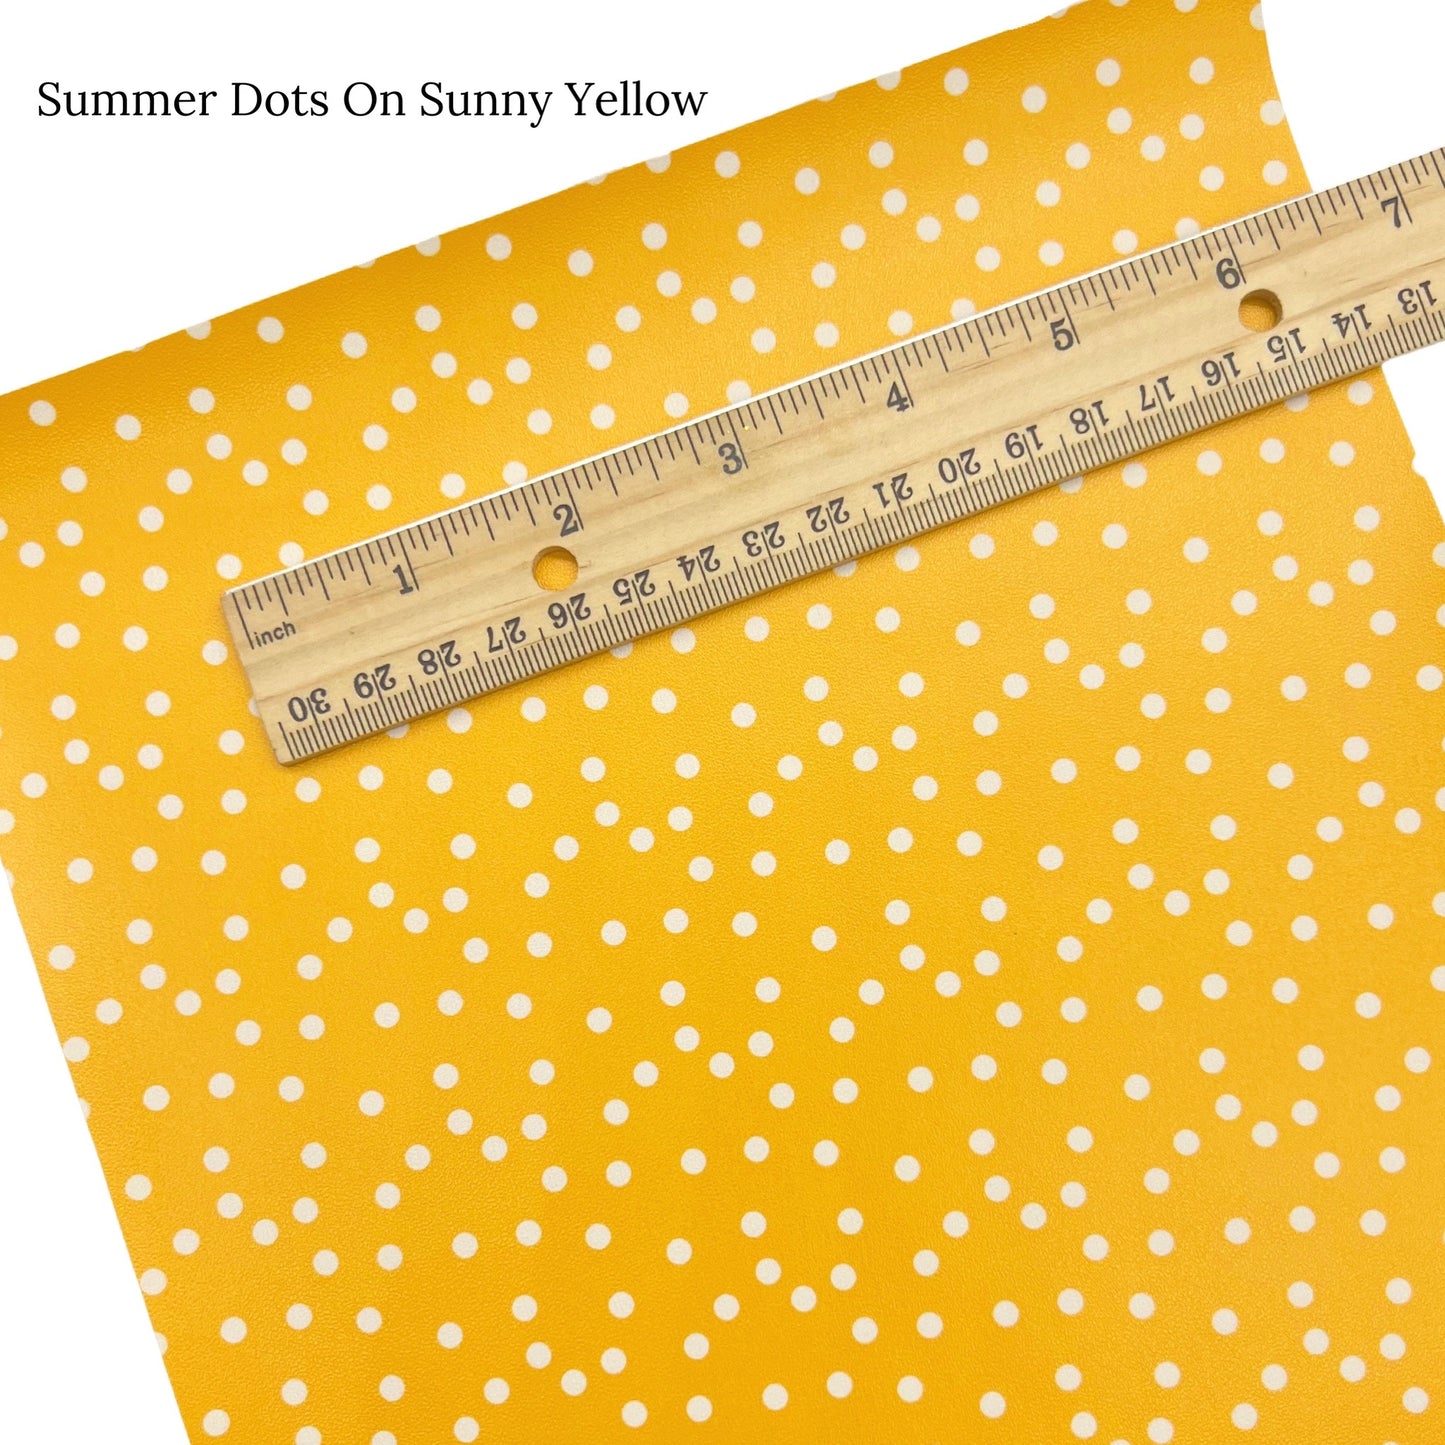 Cream dots on bright yellow faux leather sheet.